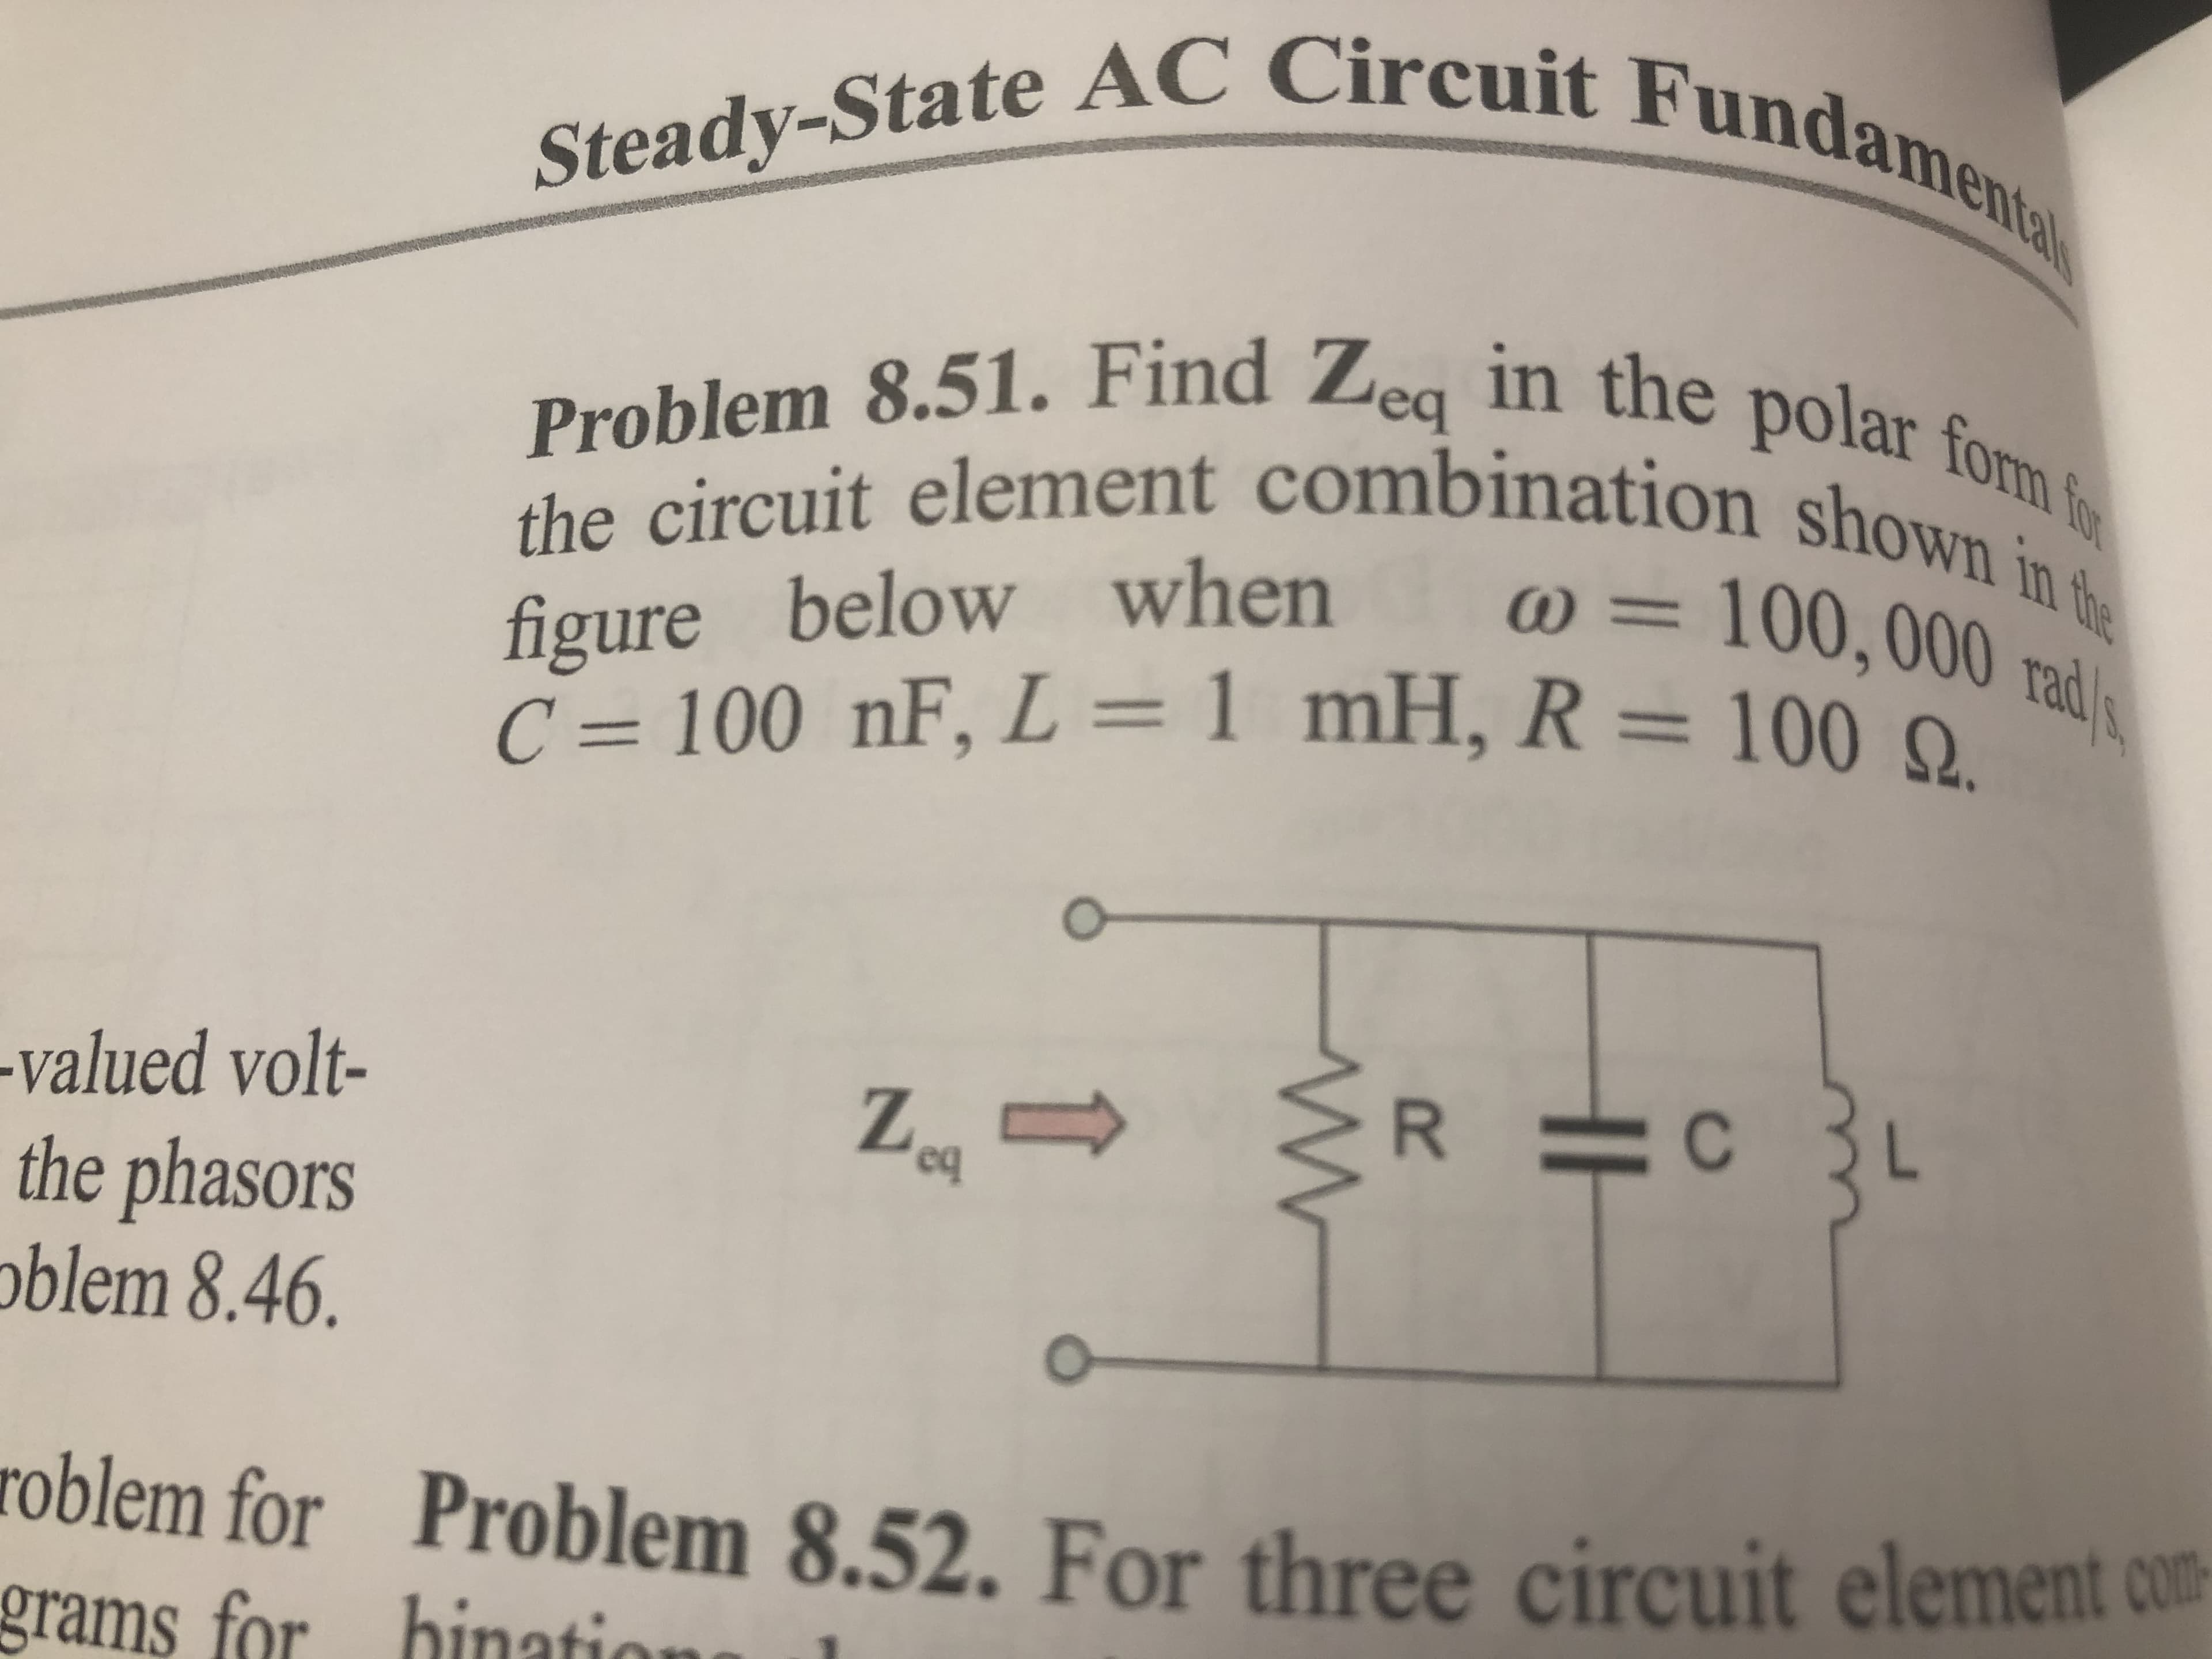 Steady-State AC Circuit Fundamenta
Problem 8.51. Find Zeg in the polar form f
the circuit element combination shown in te
) = .
figure below when
C = 100 nF,
100,000rad
%3D
L = 1 mH, R= 100 0
%3D
-valued volt-
Z.
the phasors
oblem 8.46.
roblem for
Problem 8.52. For three circuit element com-
grams for binatio
